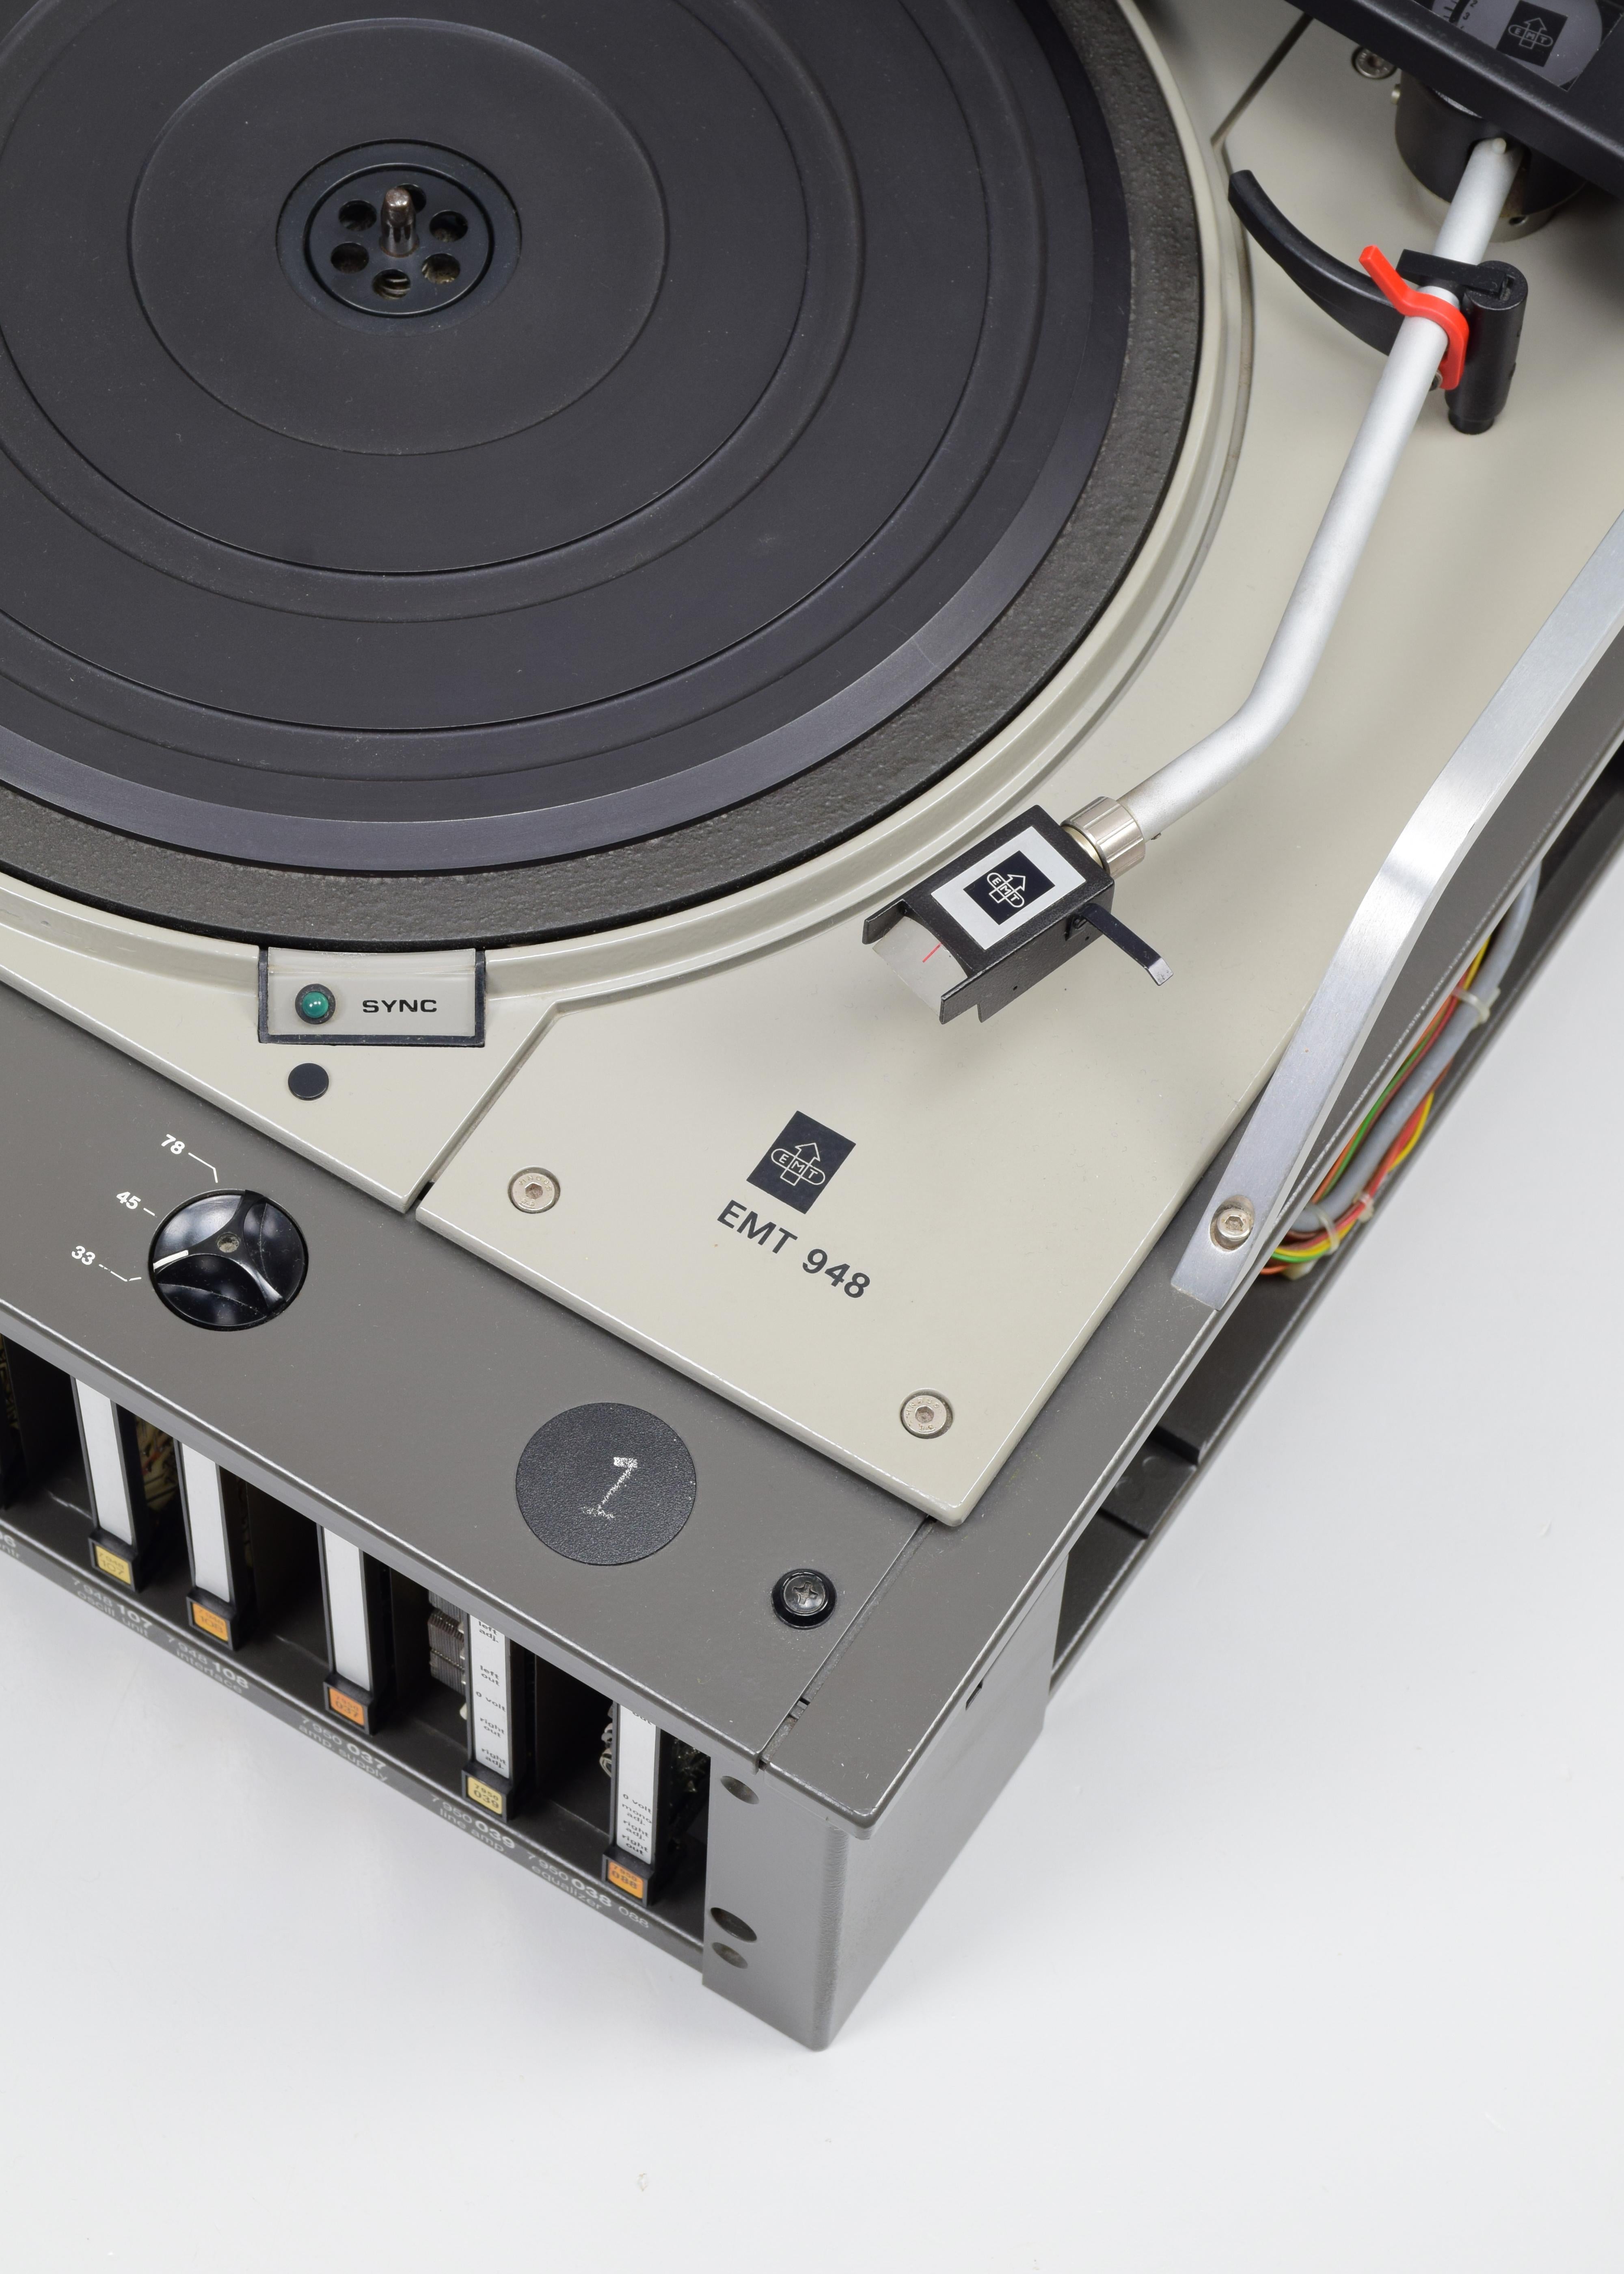 Emt 948 Turntable. Superb, Complete and Ready to Use, Looks and Sounds Fantastic 4